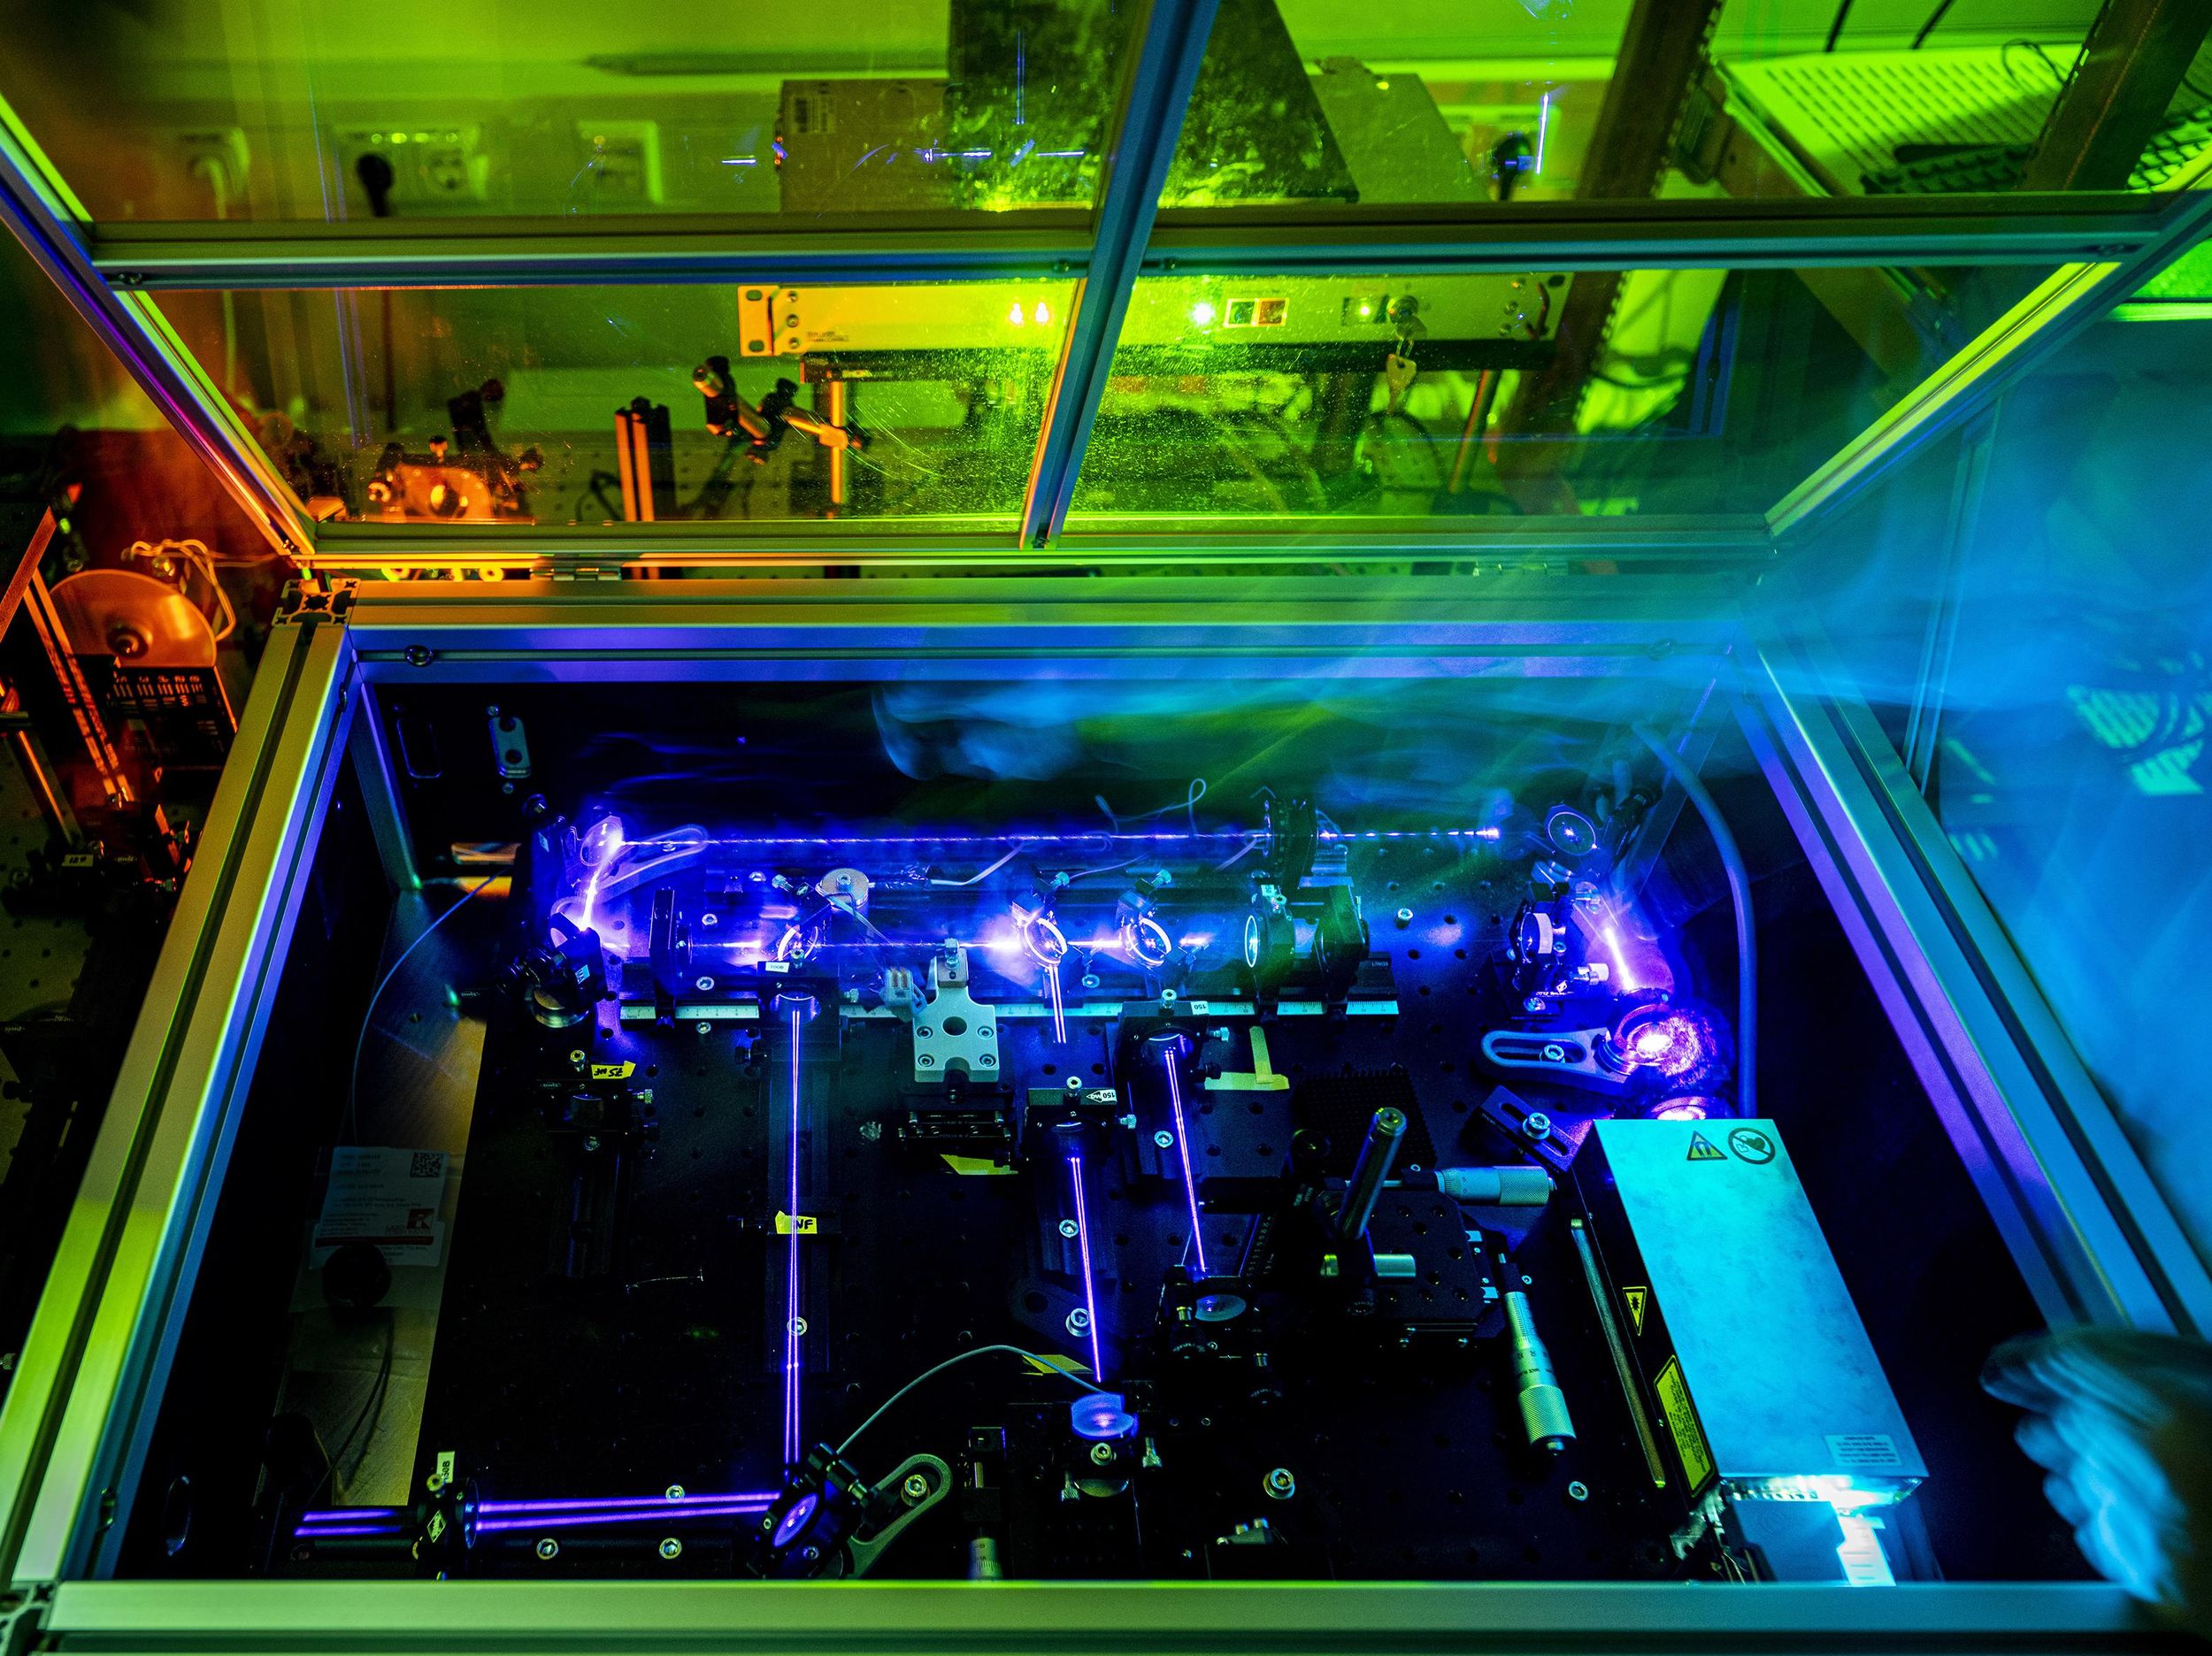 Within an enclosure, violet colored laser beams are visible along with equipment